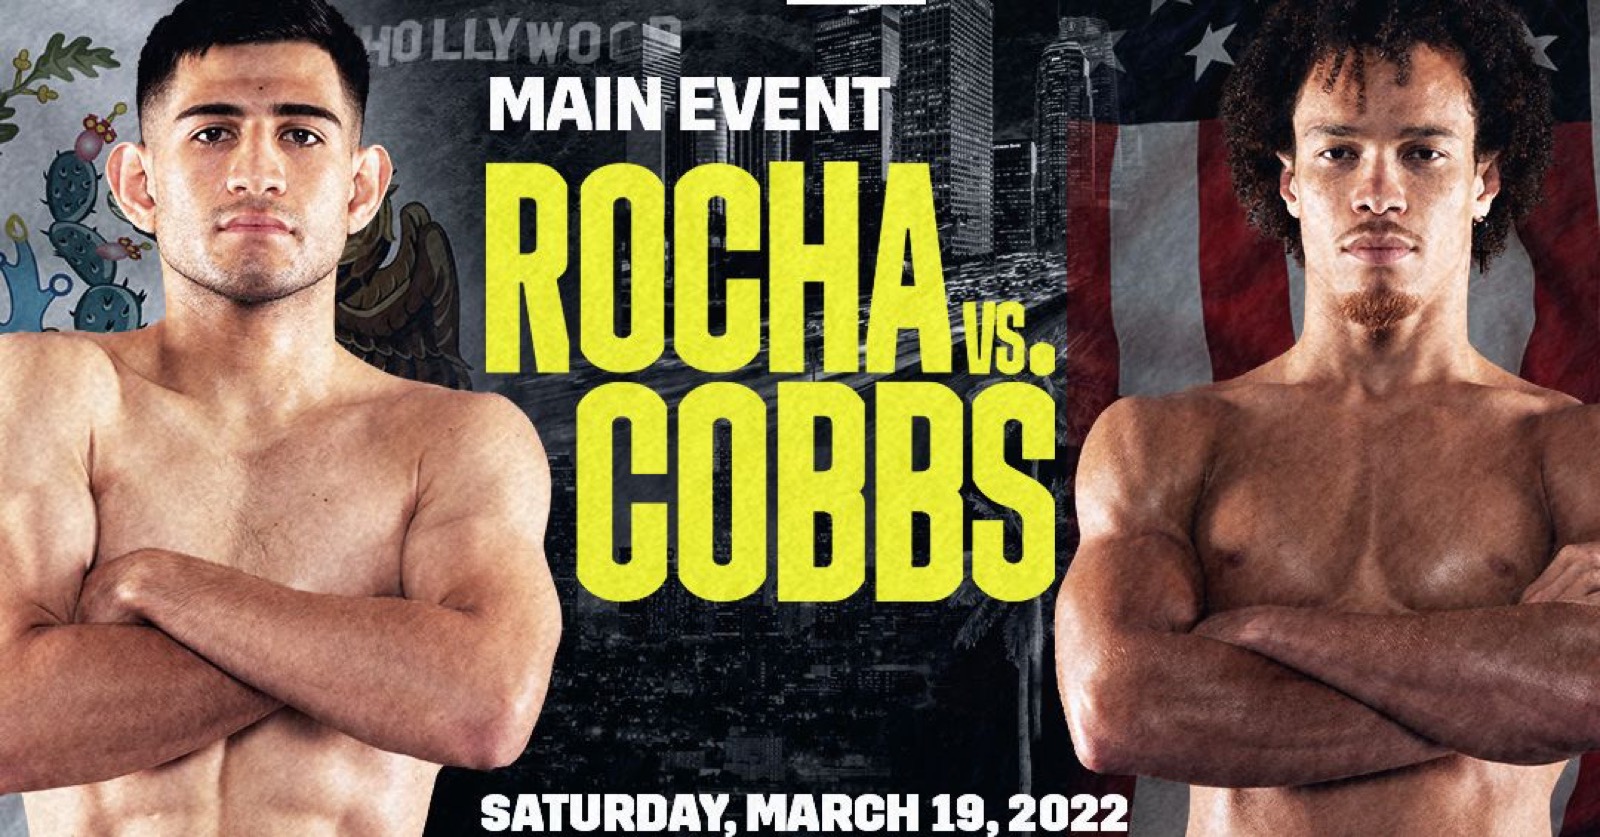 Rocha Vs. Cobbs Set As New Main Event On March 19